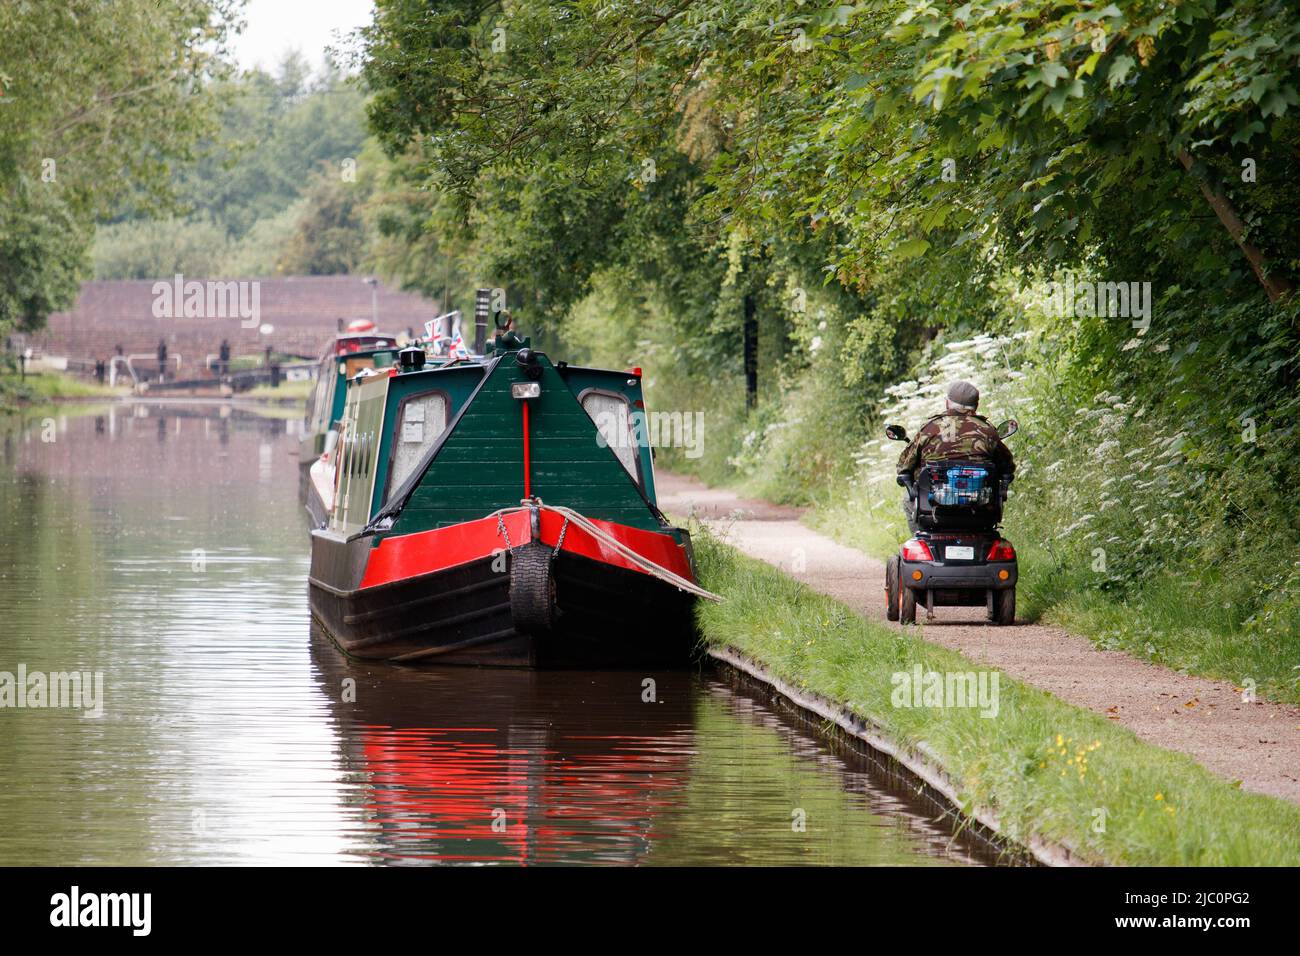 A disabled person on a mobile scooter making their way along a canal towpath unassisted. Picture shows how a good pathway alongside the canal can improve the life of a disabled person. Stock Photo